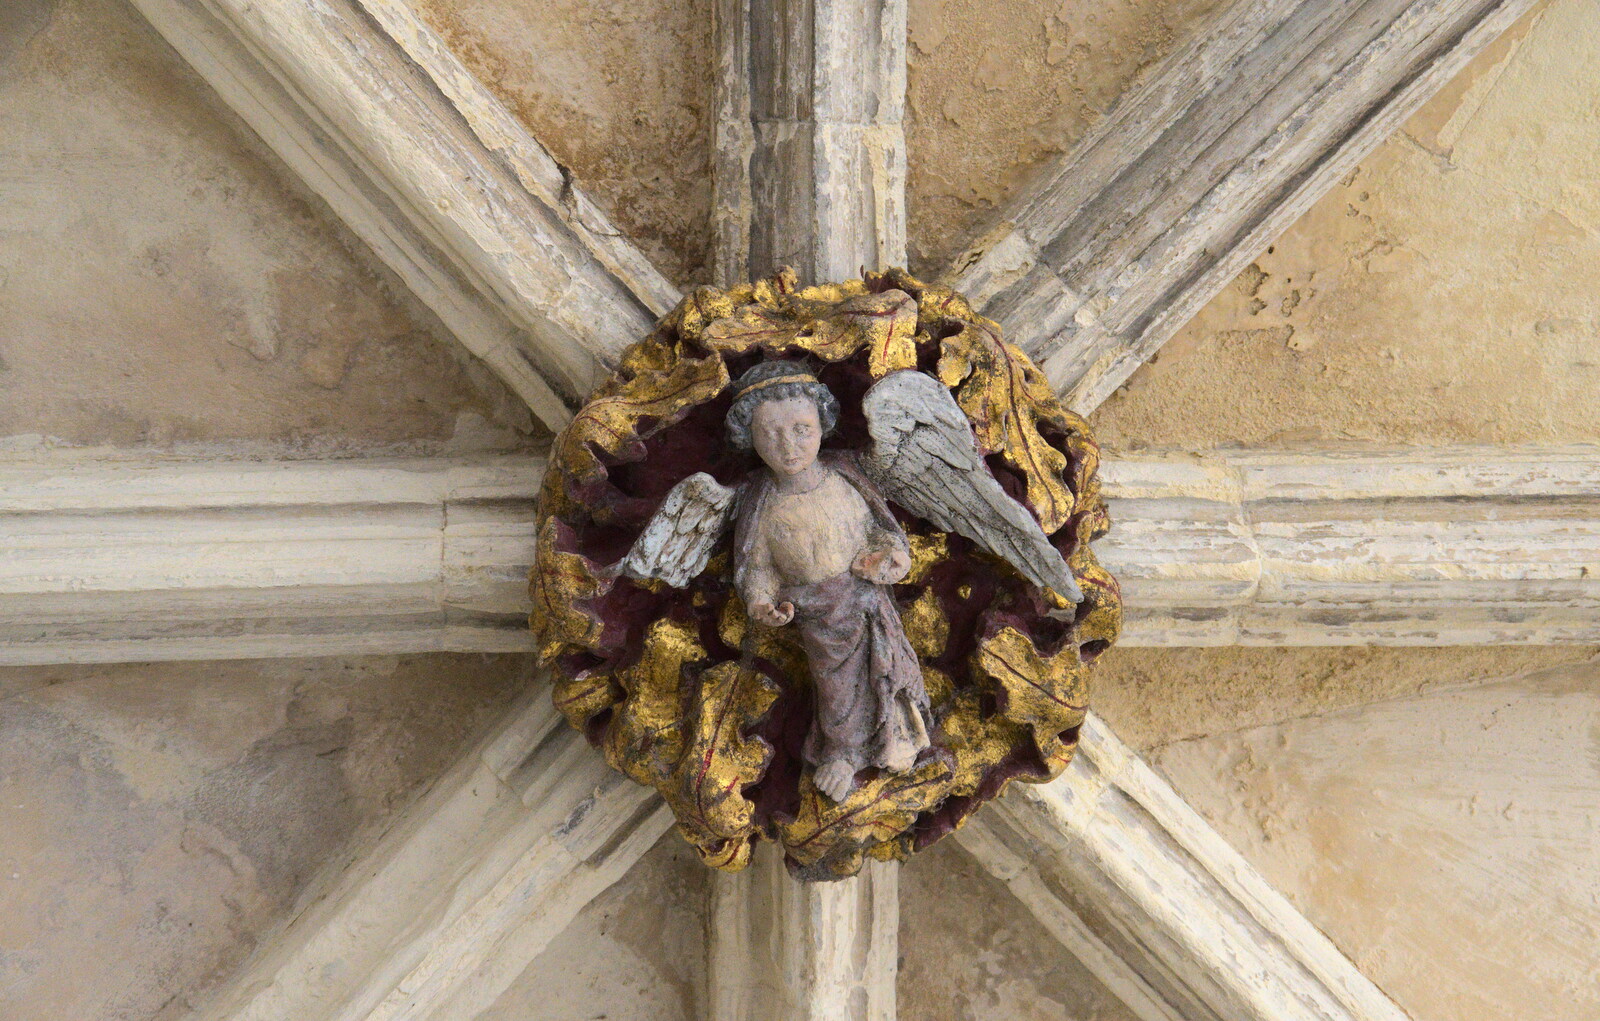 An angel surrounded by gilded leaves from Discovering the Hidden City: Norwich, Norfolk - 23rd May 2022